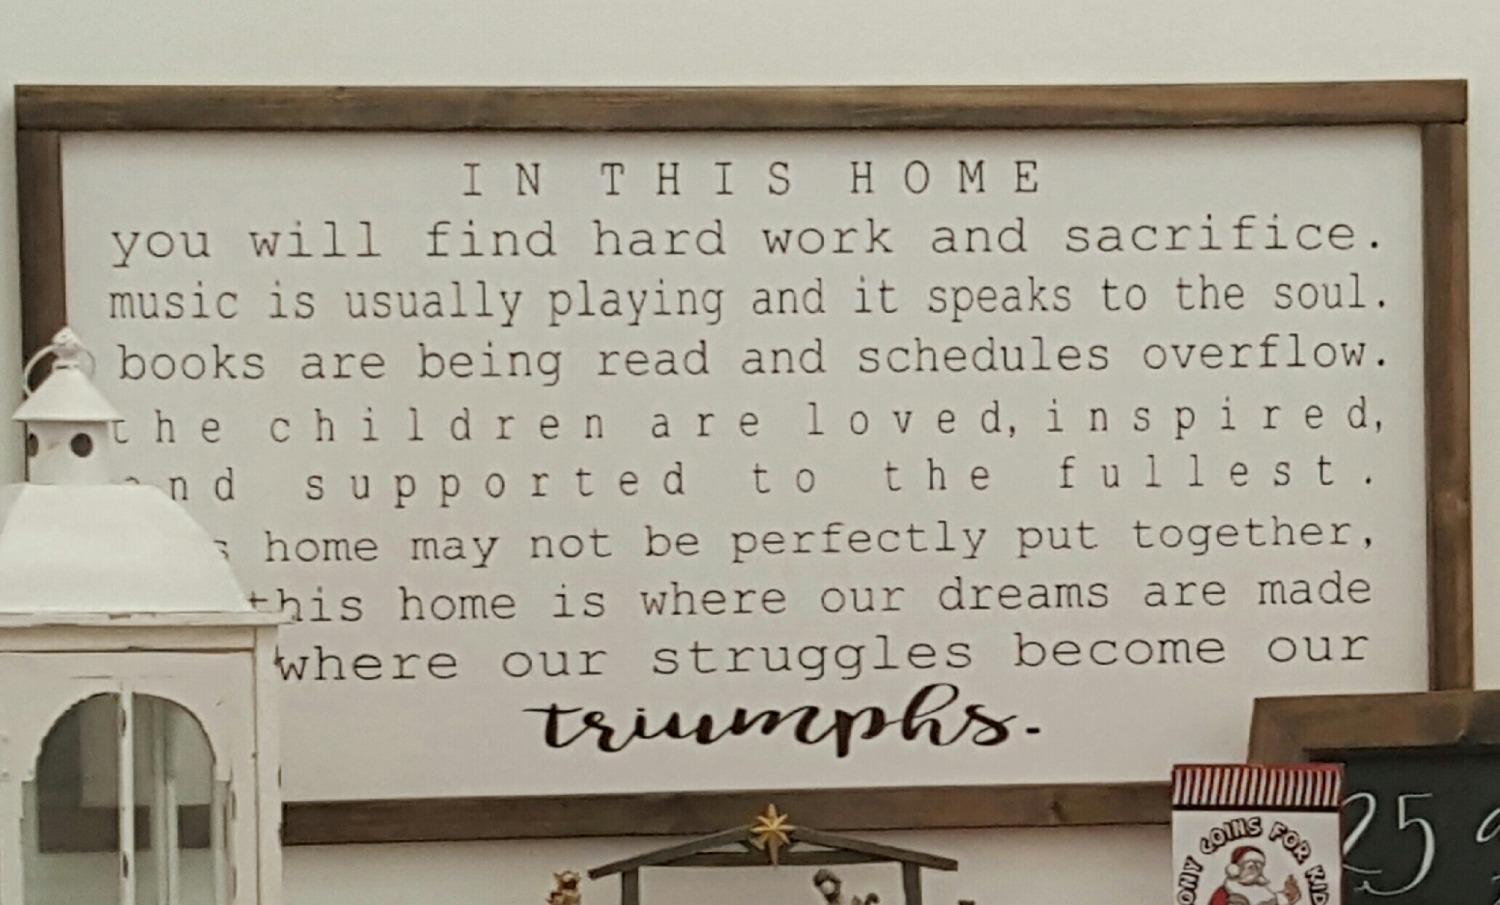 looking for the main font used on this sign